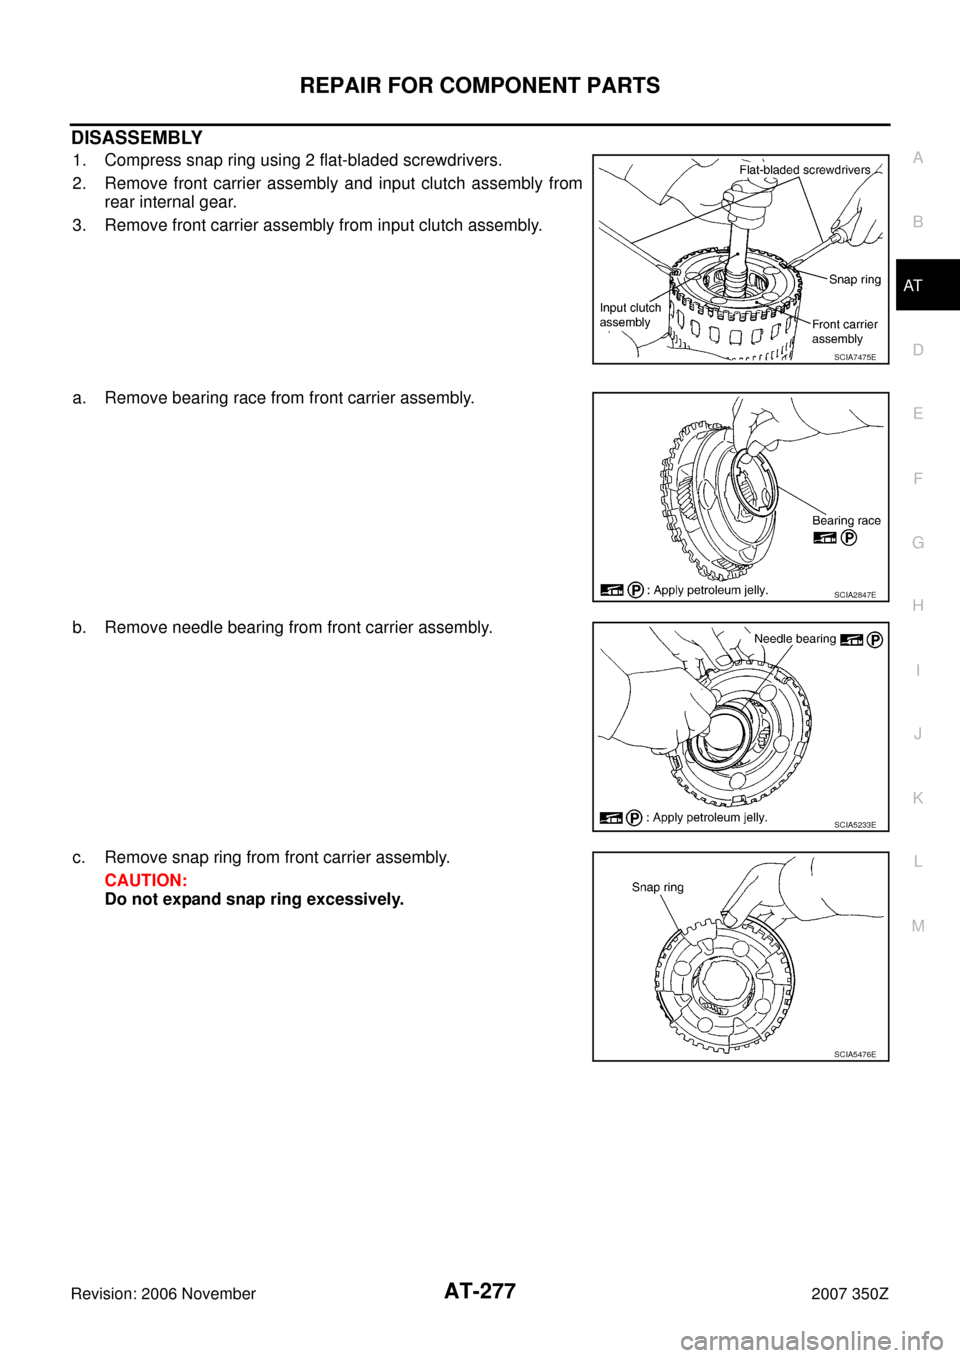 NISSAN 350Z 2007 Z33 Automatic Transmission Workshop Manual REPAIR FOR COMPONENT PARTS
AT-277
D
E
F
G
H
I
J
K
L
MA
B
AT
Revision: 2006 November2007 350Z
DISASSEMBLY
1. Compress snap ring using 2 flat-bladed screwdrivers.
2. Remove front carrier assembly and in